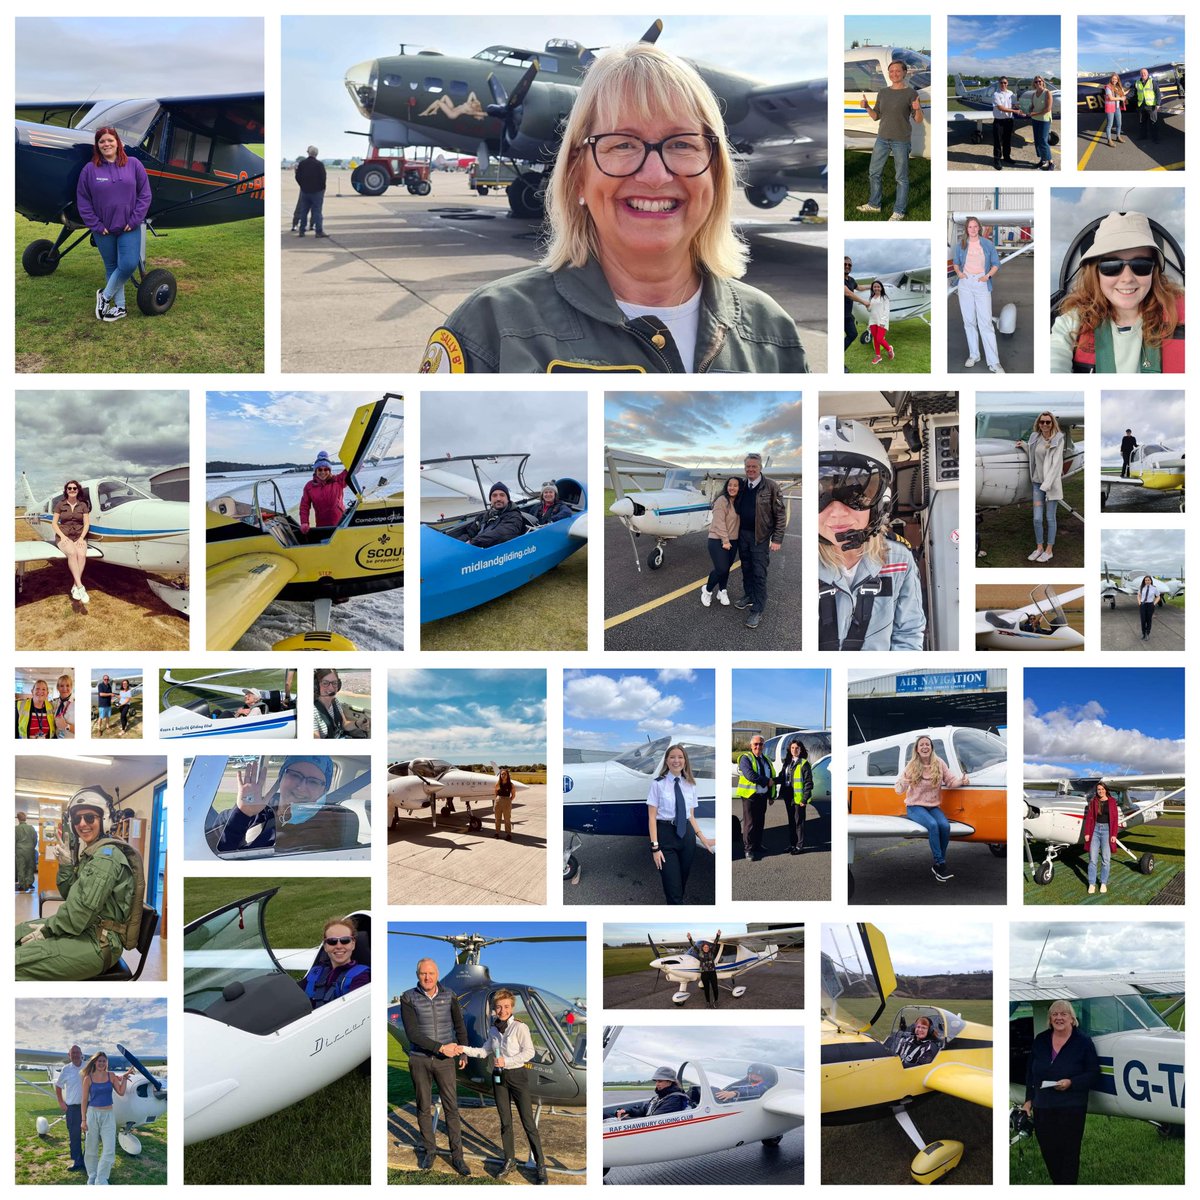 ✈️ Have you seen the benefits that come with BWPA membership? 💠 Make new friends 💠 Join our fun events 💠 Apply for #BWPAScholarships 💠 Members' forum 💠 Careers guidance 💠 Exclusive member discounts 💠 Free landing fees Find out more ➡️ bwpa.co.uk/membership/